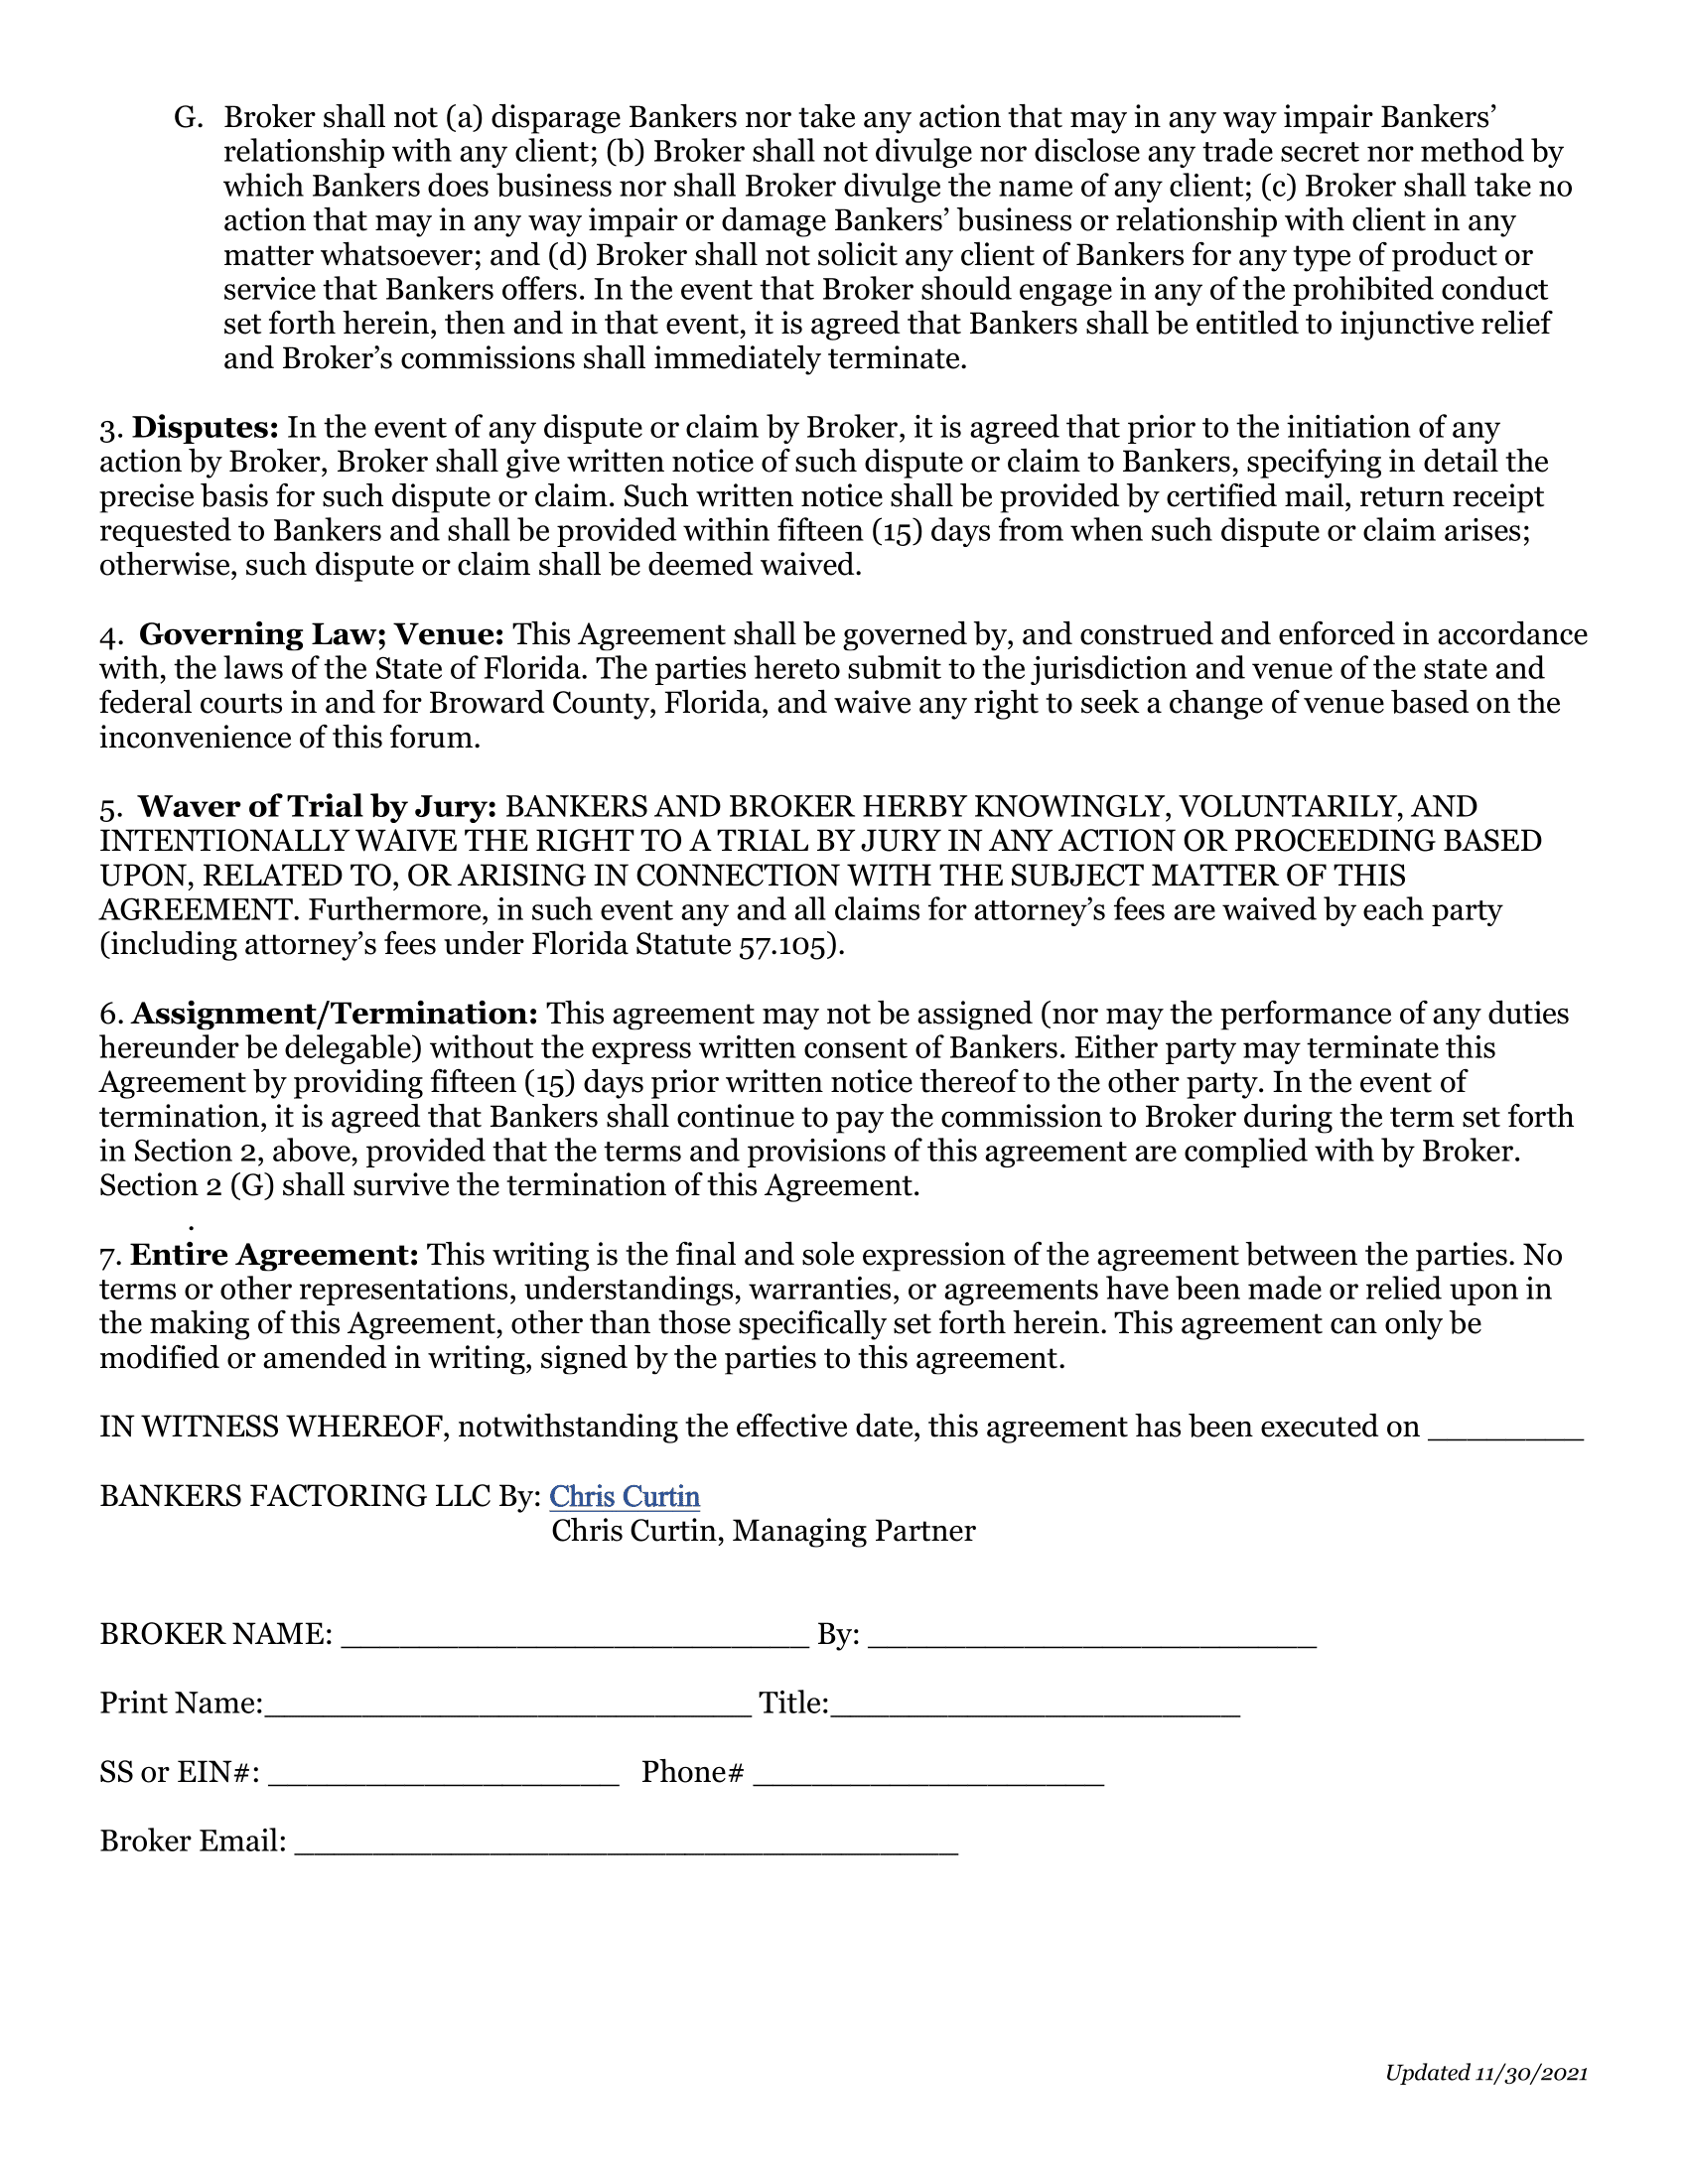 Online Broker Agreement Page One